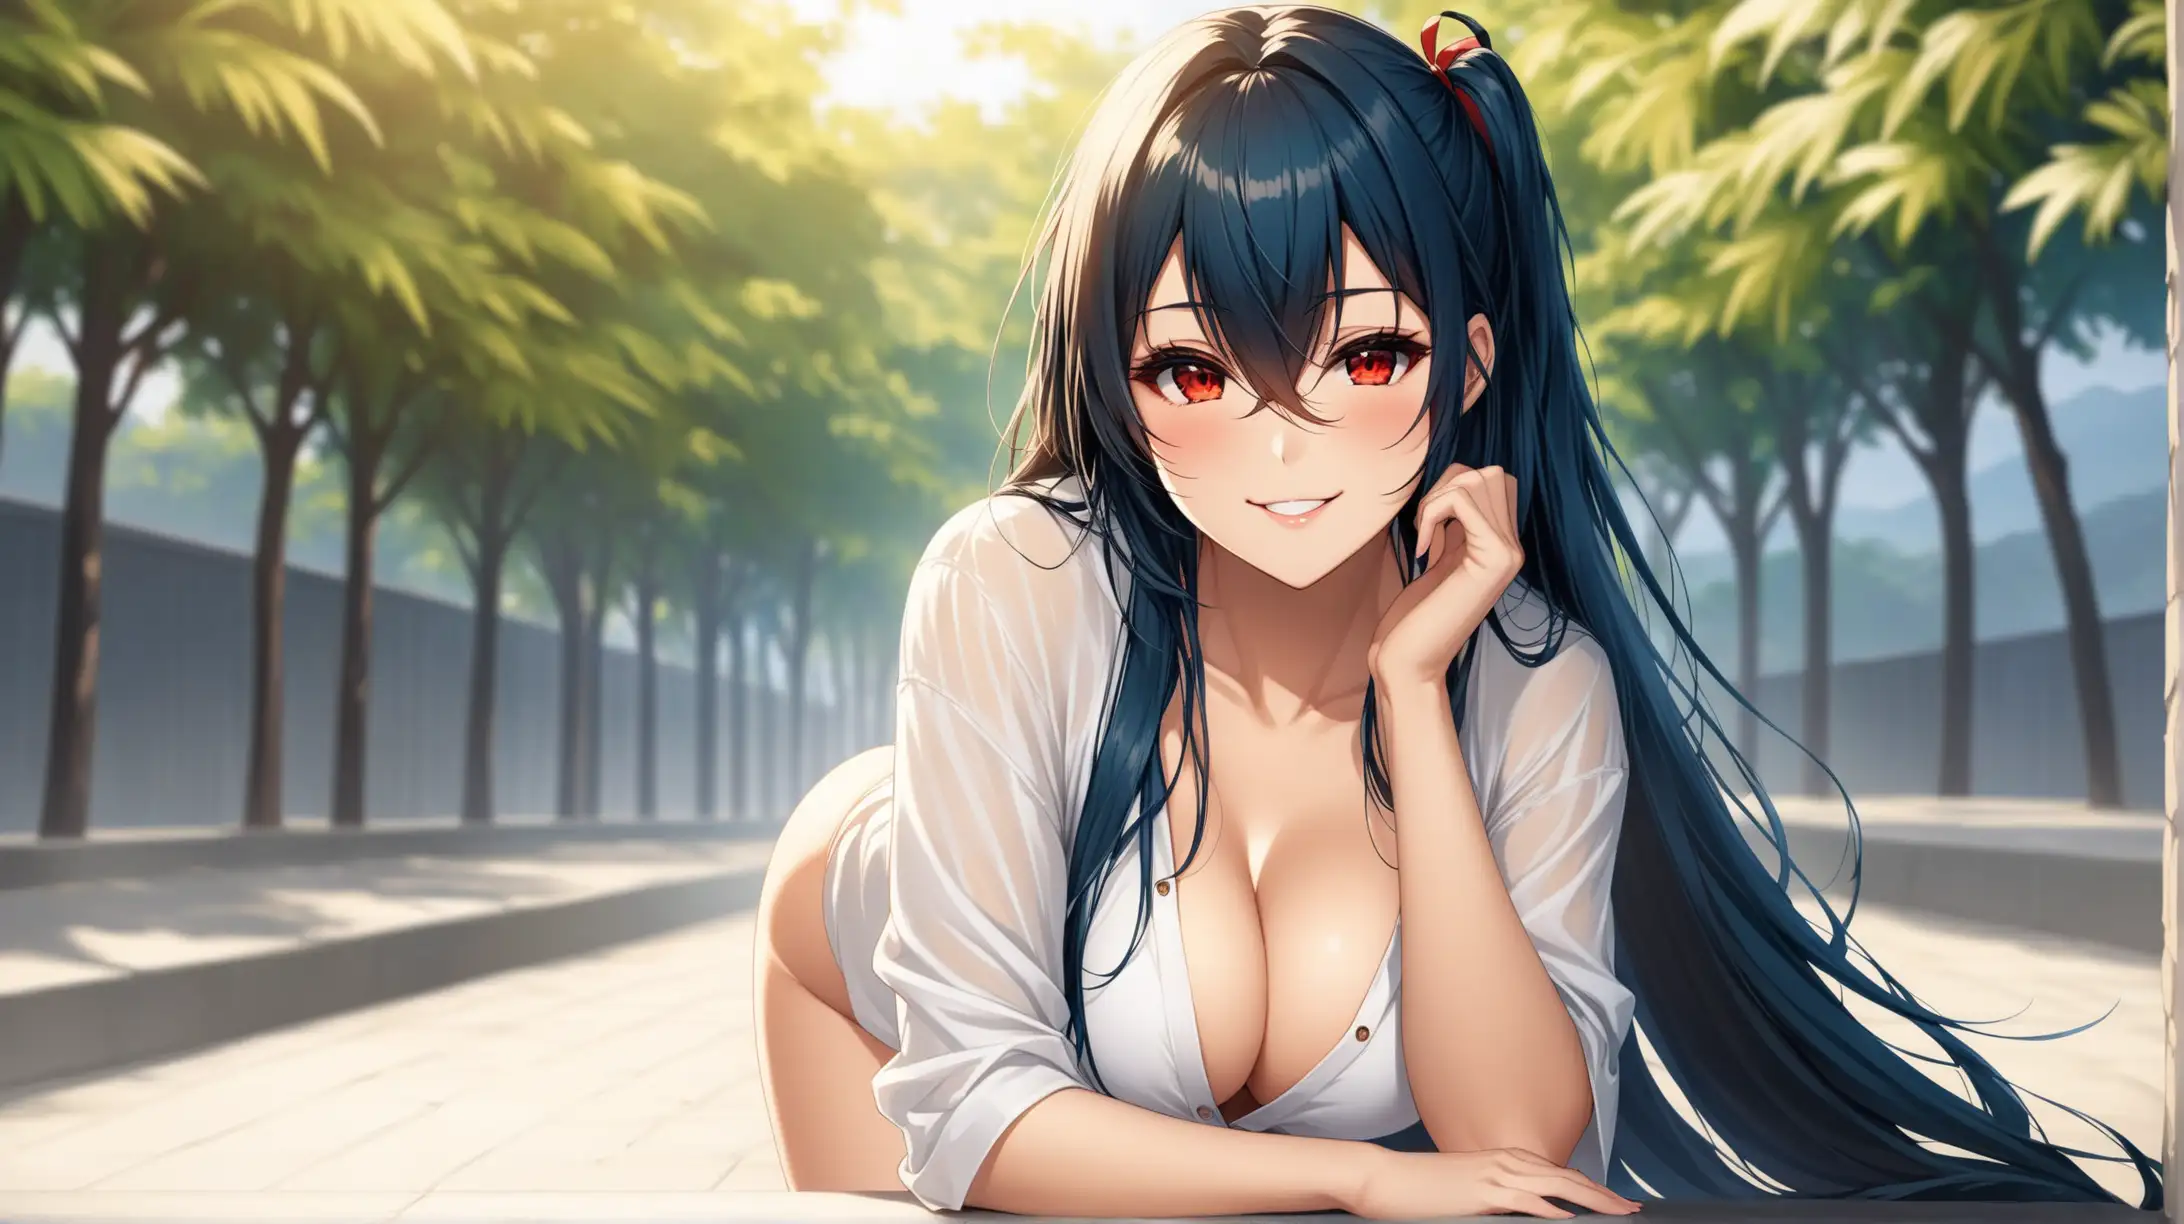 Draw the character Taihou from Azur Lane, red eyes, long hair, high quality, natural lighting, long shot, outdoors, seductive pose, casual outfit, smiling